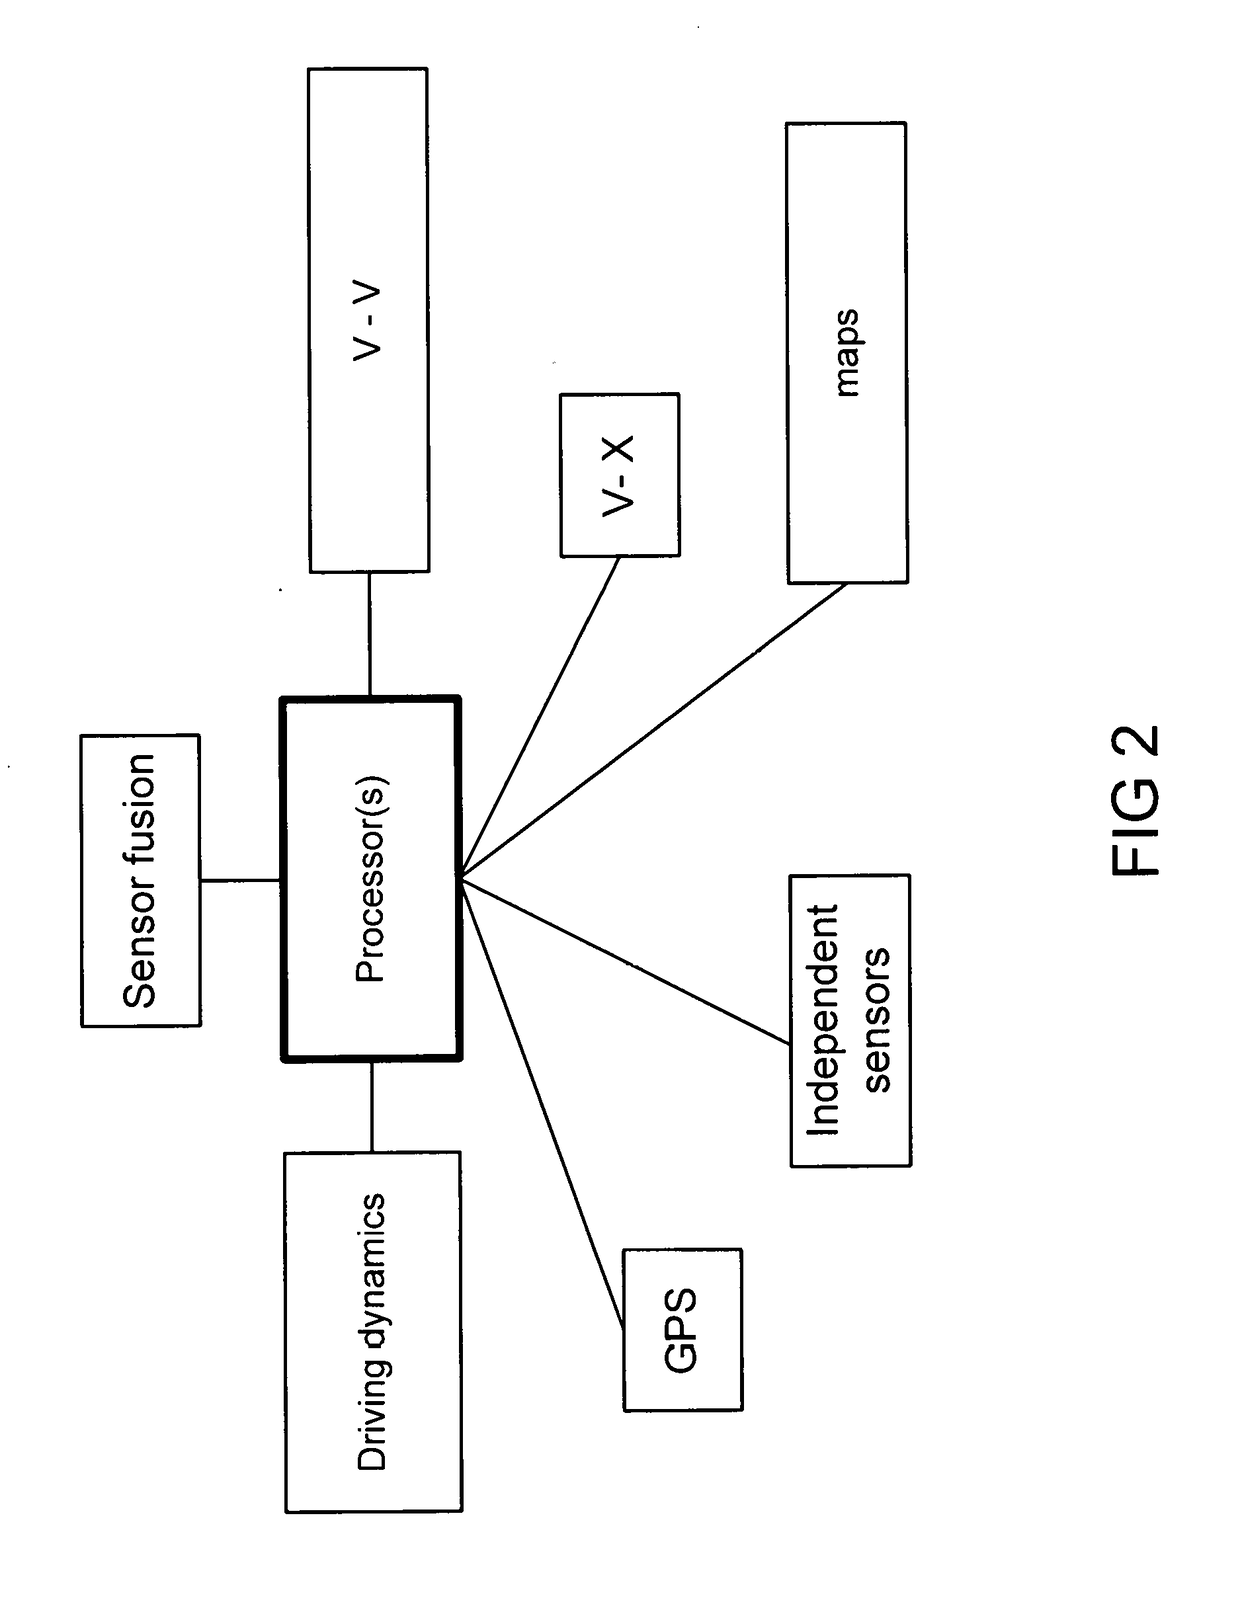 Long Range Path Prediction and Target Classification Algorithm using connected vehicle data and others